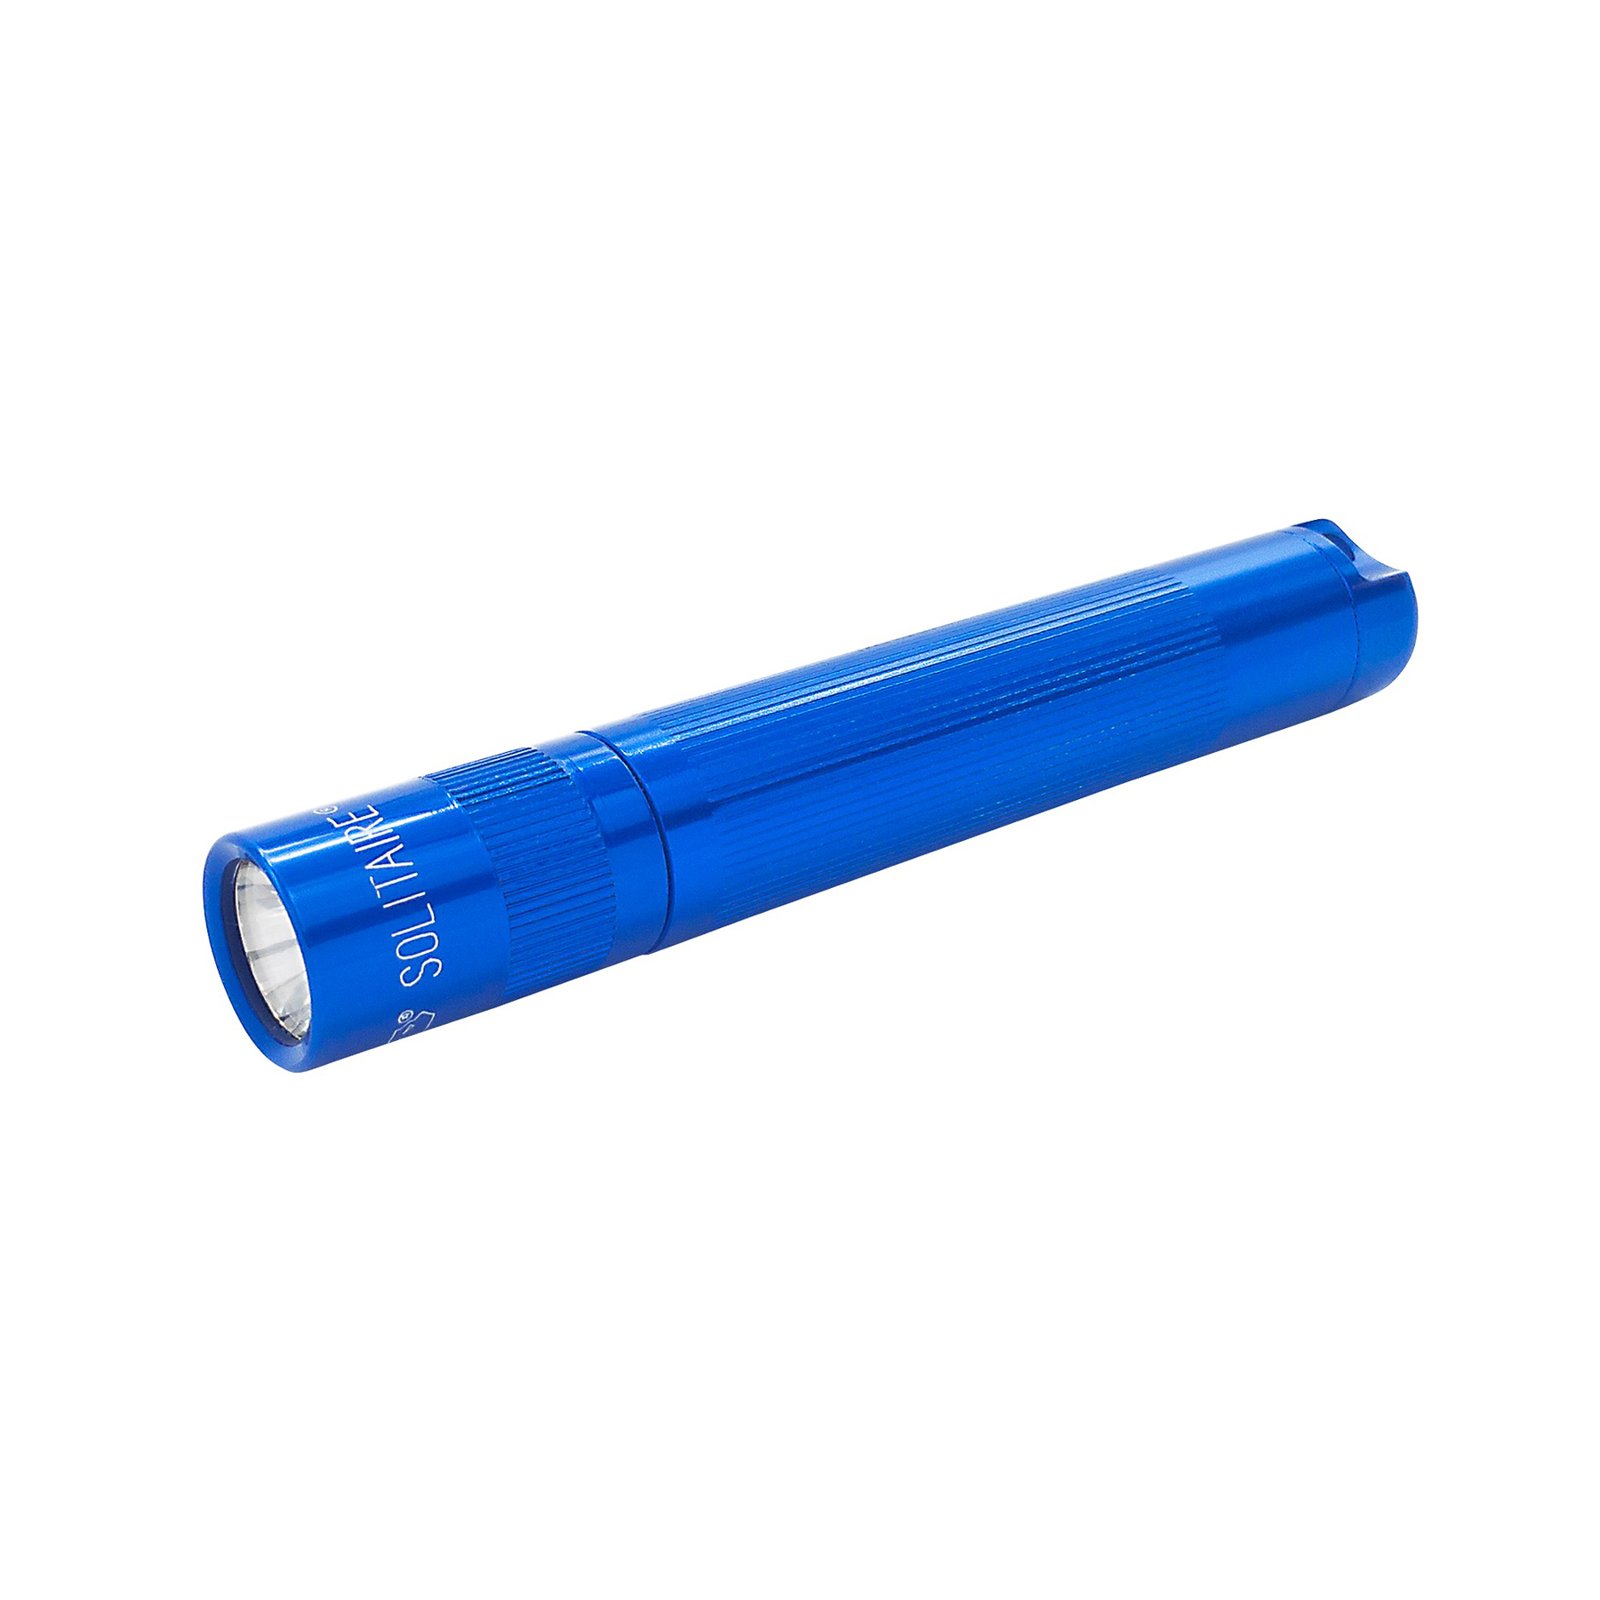 Maglite LED zaklamp Solitaire, 1 Cell AAA, blauw